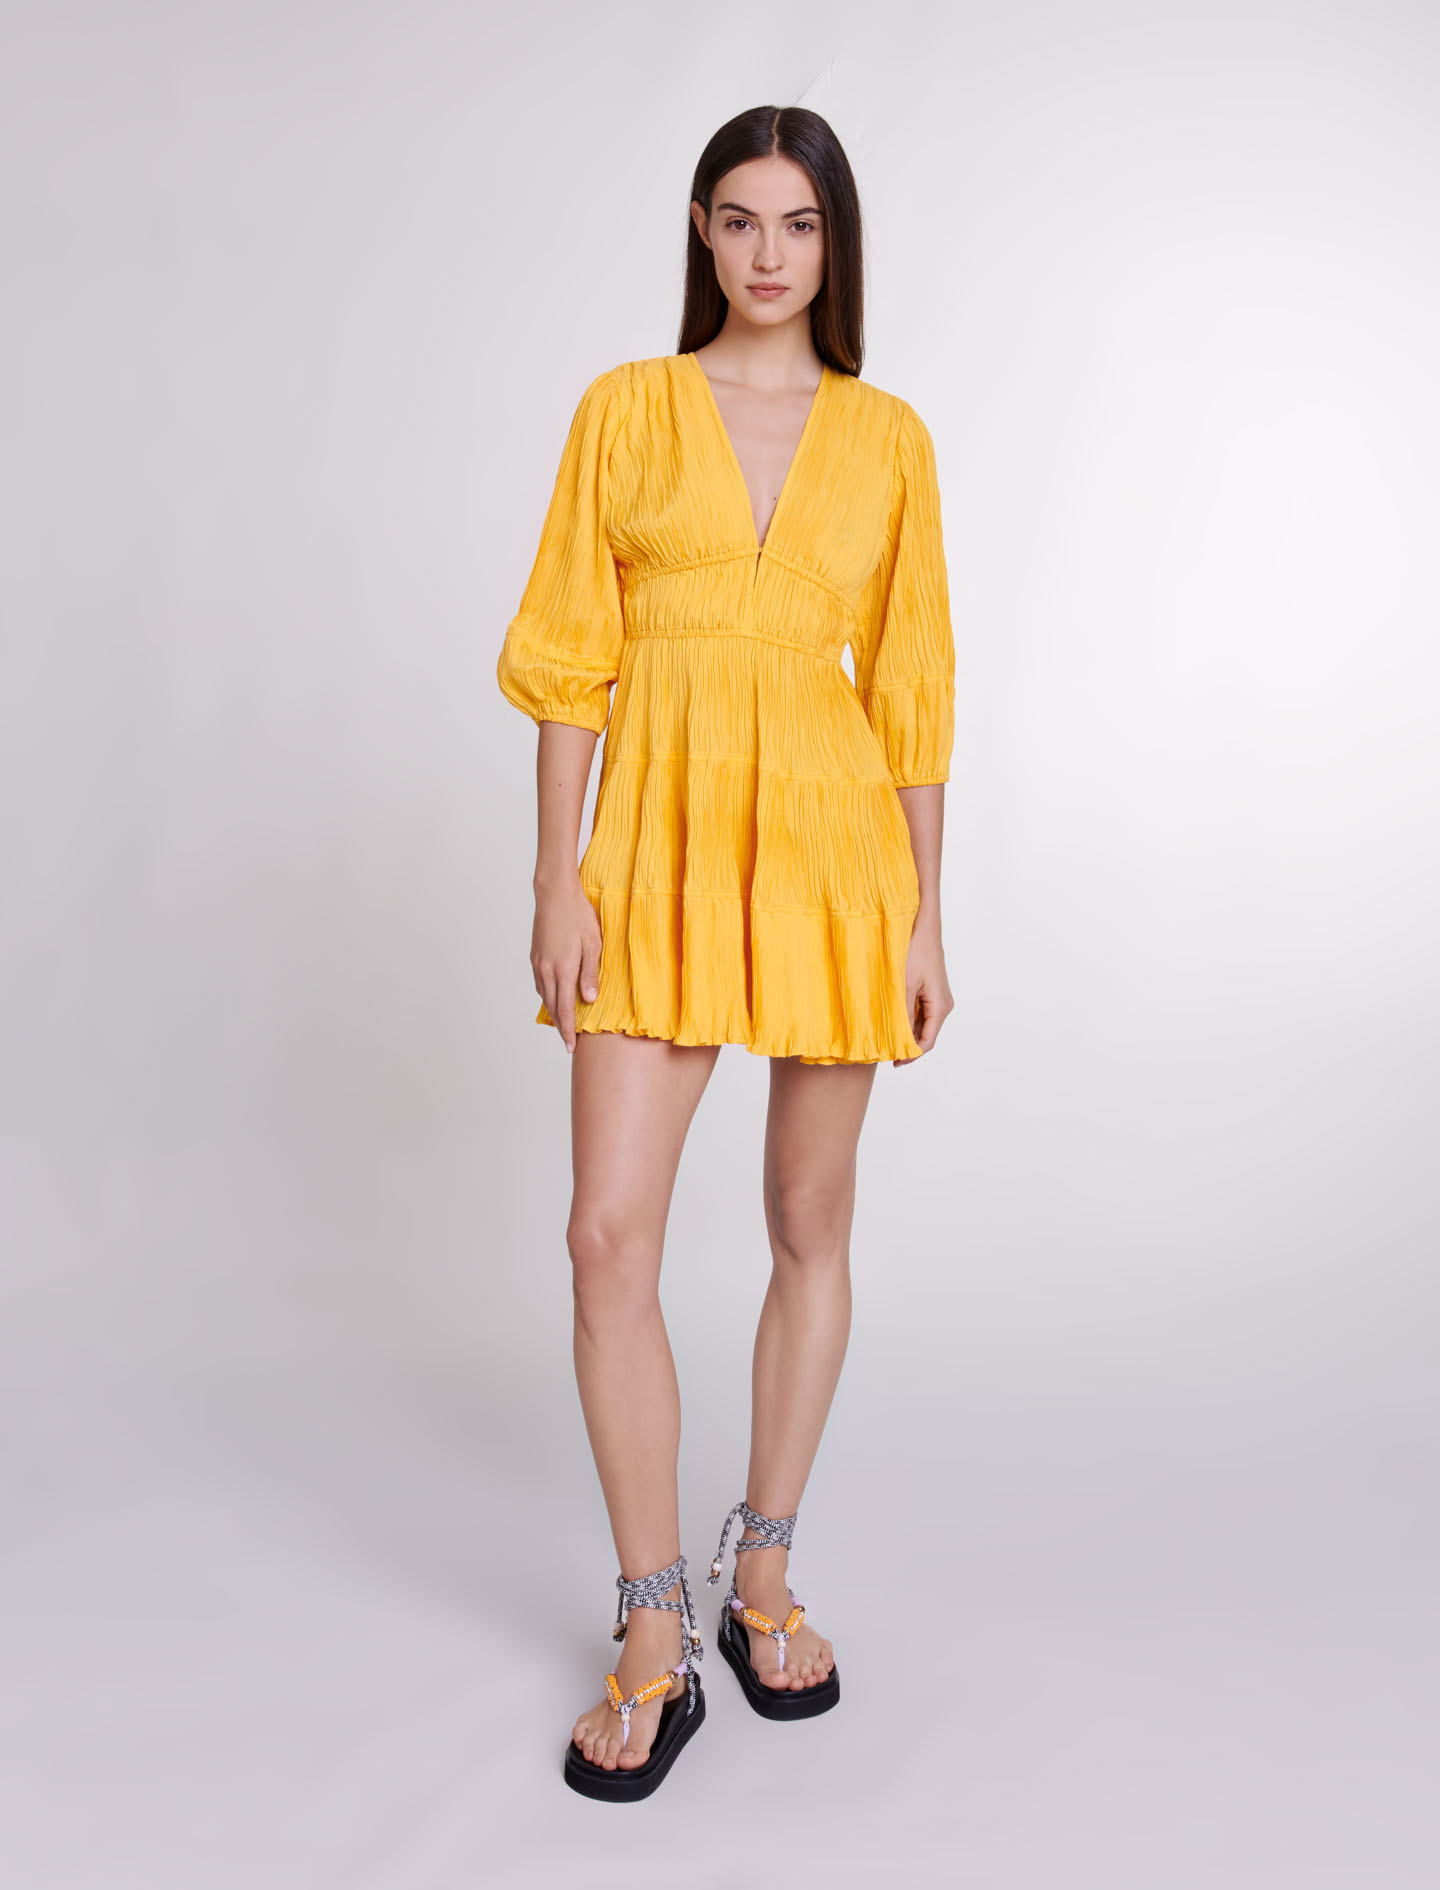 Maje Woman's polyester Buttons: Ruched short dress for Spring/Summer, in color Yellow / Yellow